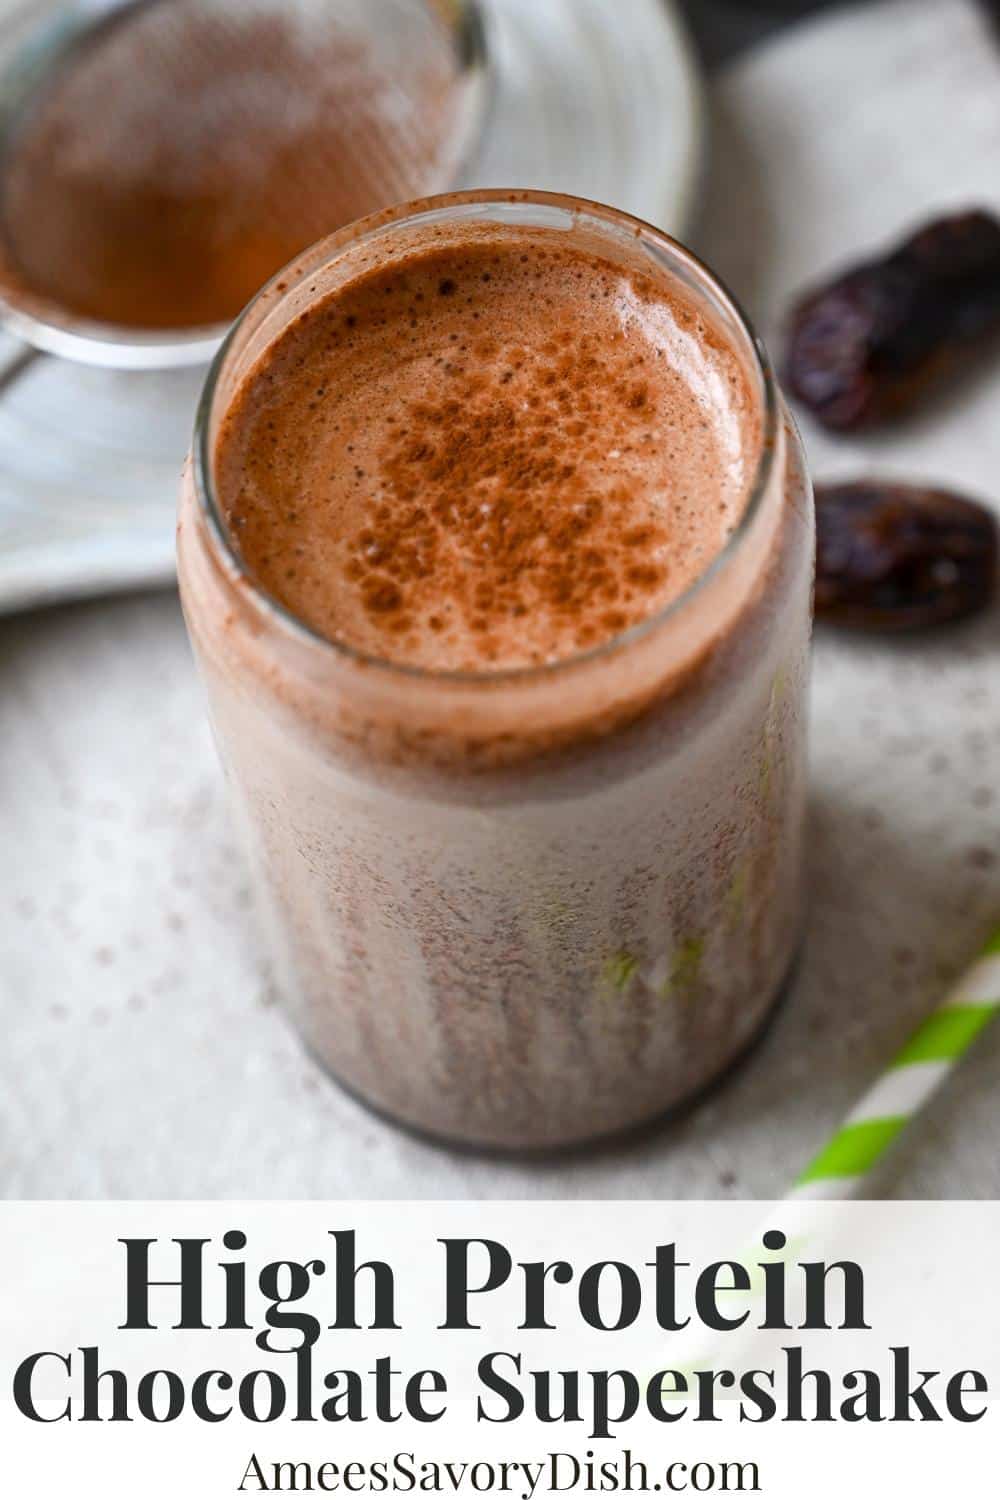 Made with whey protein, almond milk, Medjool dates, baby spinach, almonds, and cocoa powder, it’s a satisfying meal in a glass with 30 grams of protein. via @Ameessavorydish